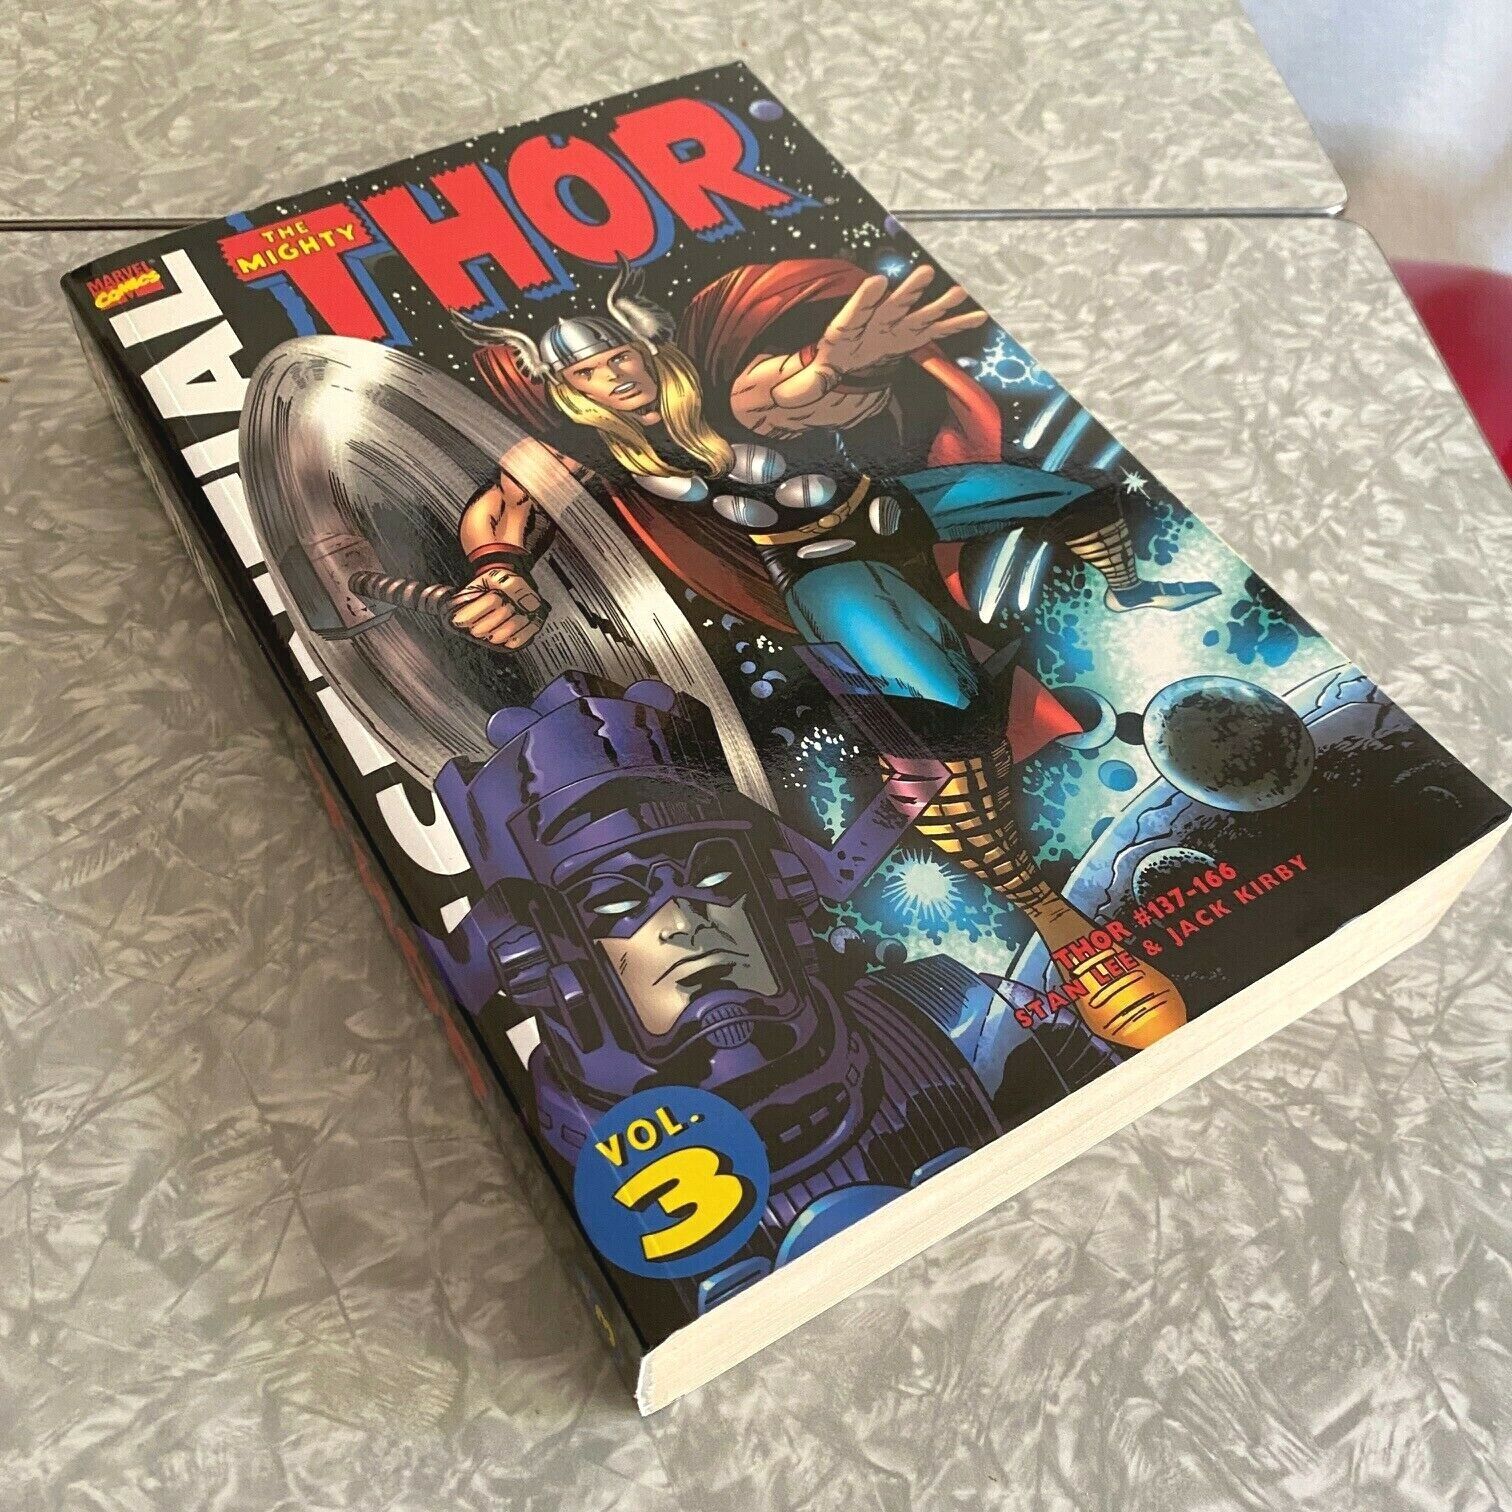 The Essential Thor Vol 3 Comics #137-166 Stan Lee Jack Kirby Marvel 2011 Release